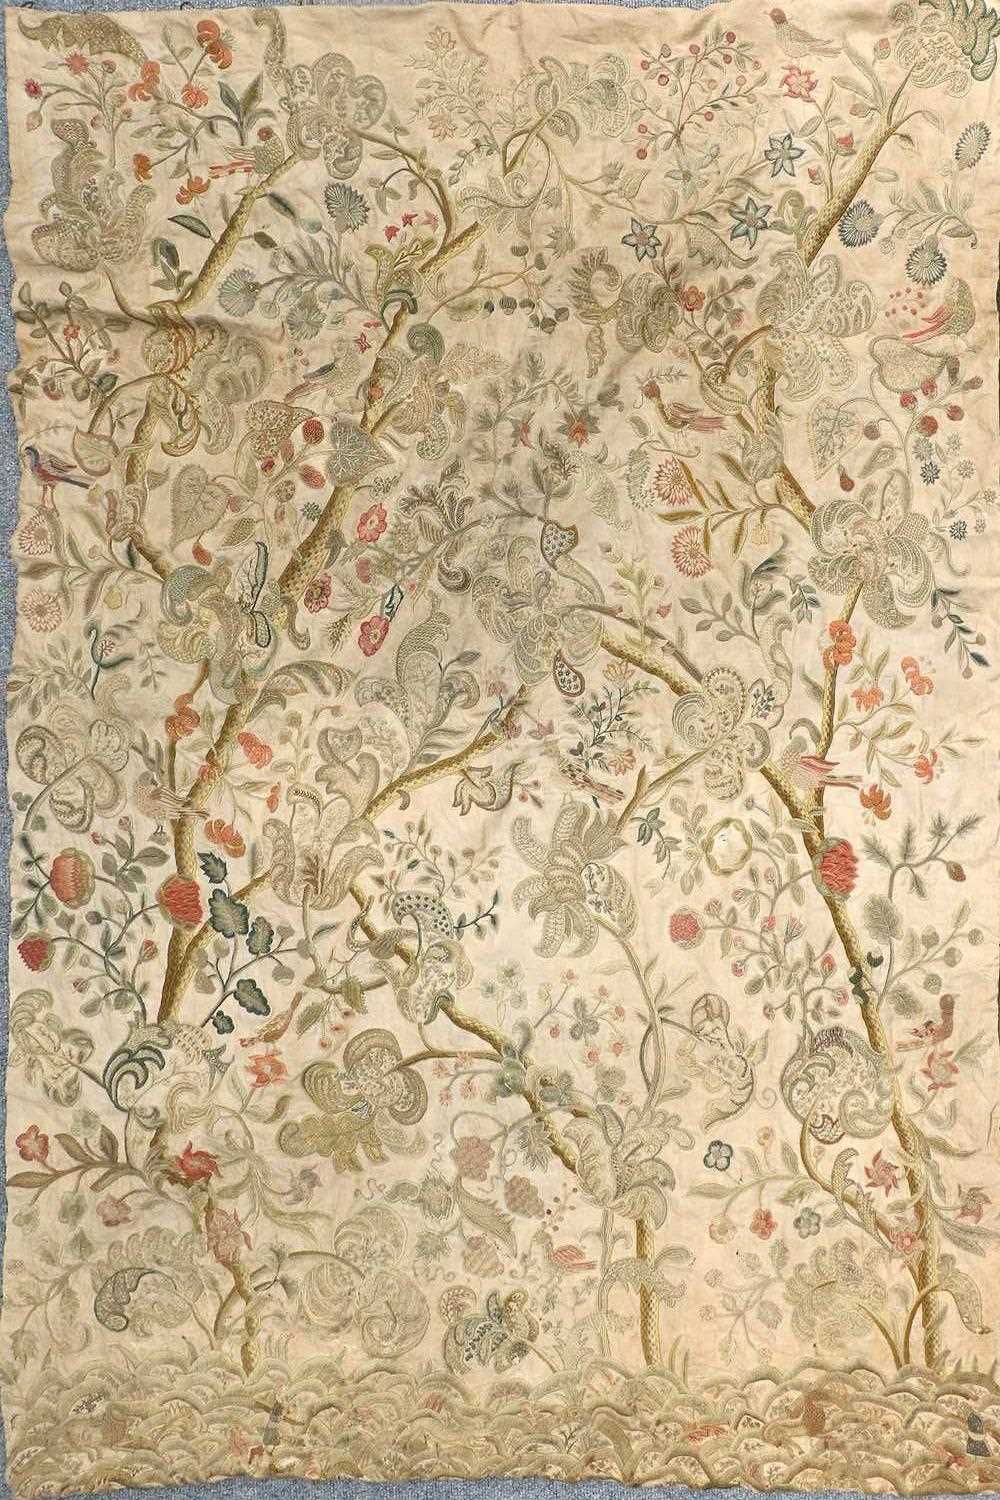 Late 19th Century Crewel Work Curtain, decorated overall in decorative floral designs with birds - Image 2 of 21